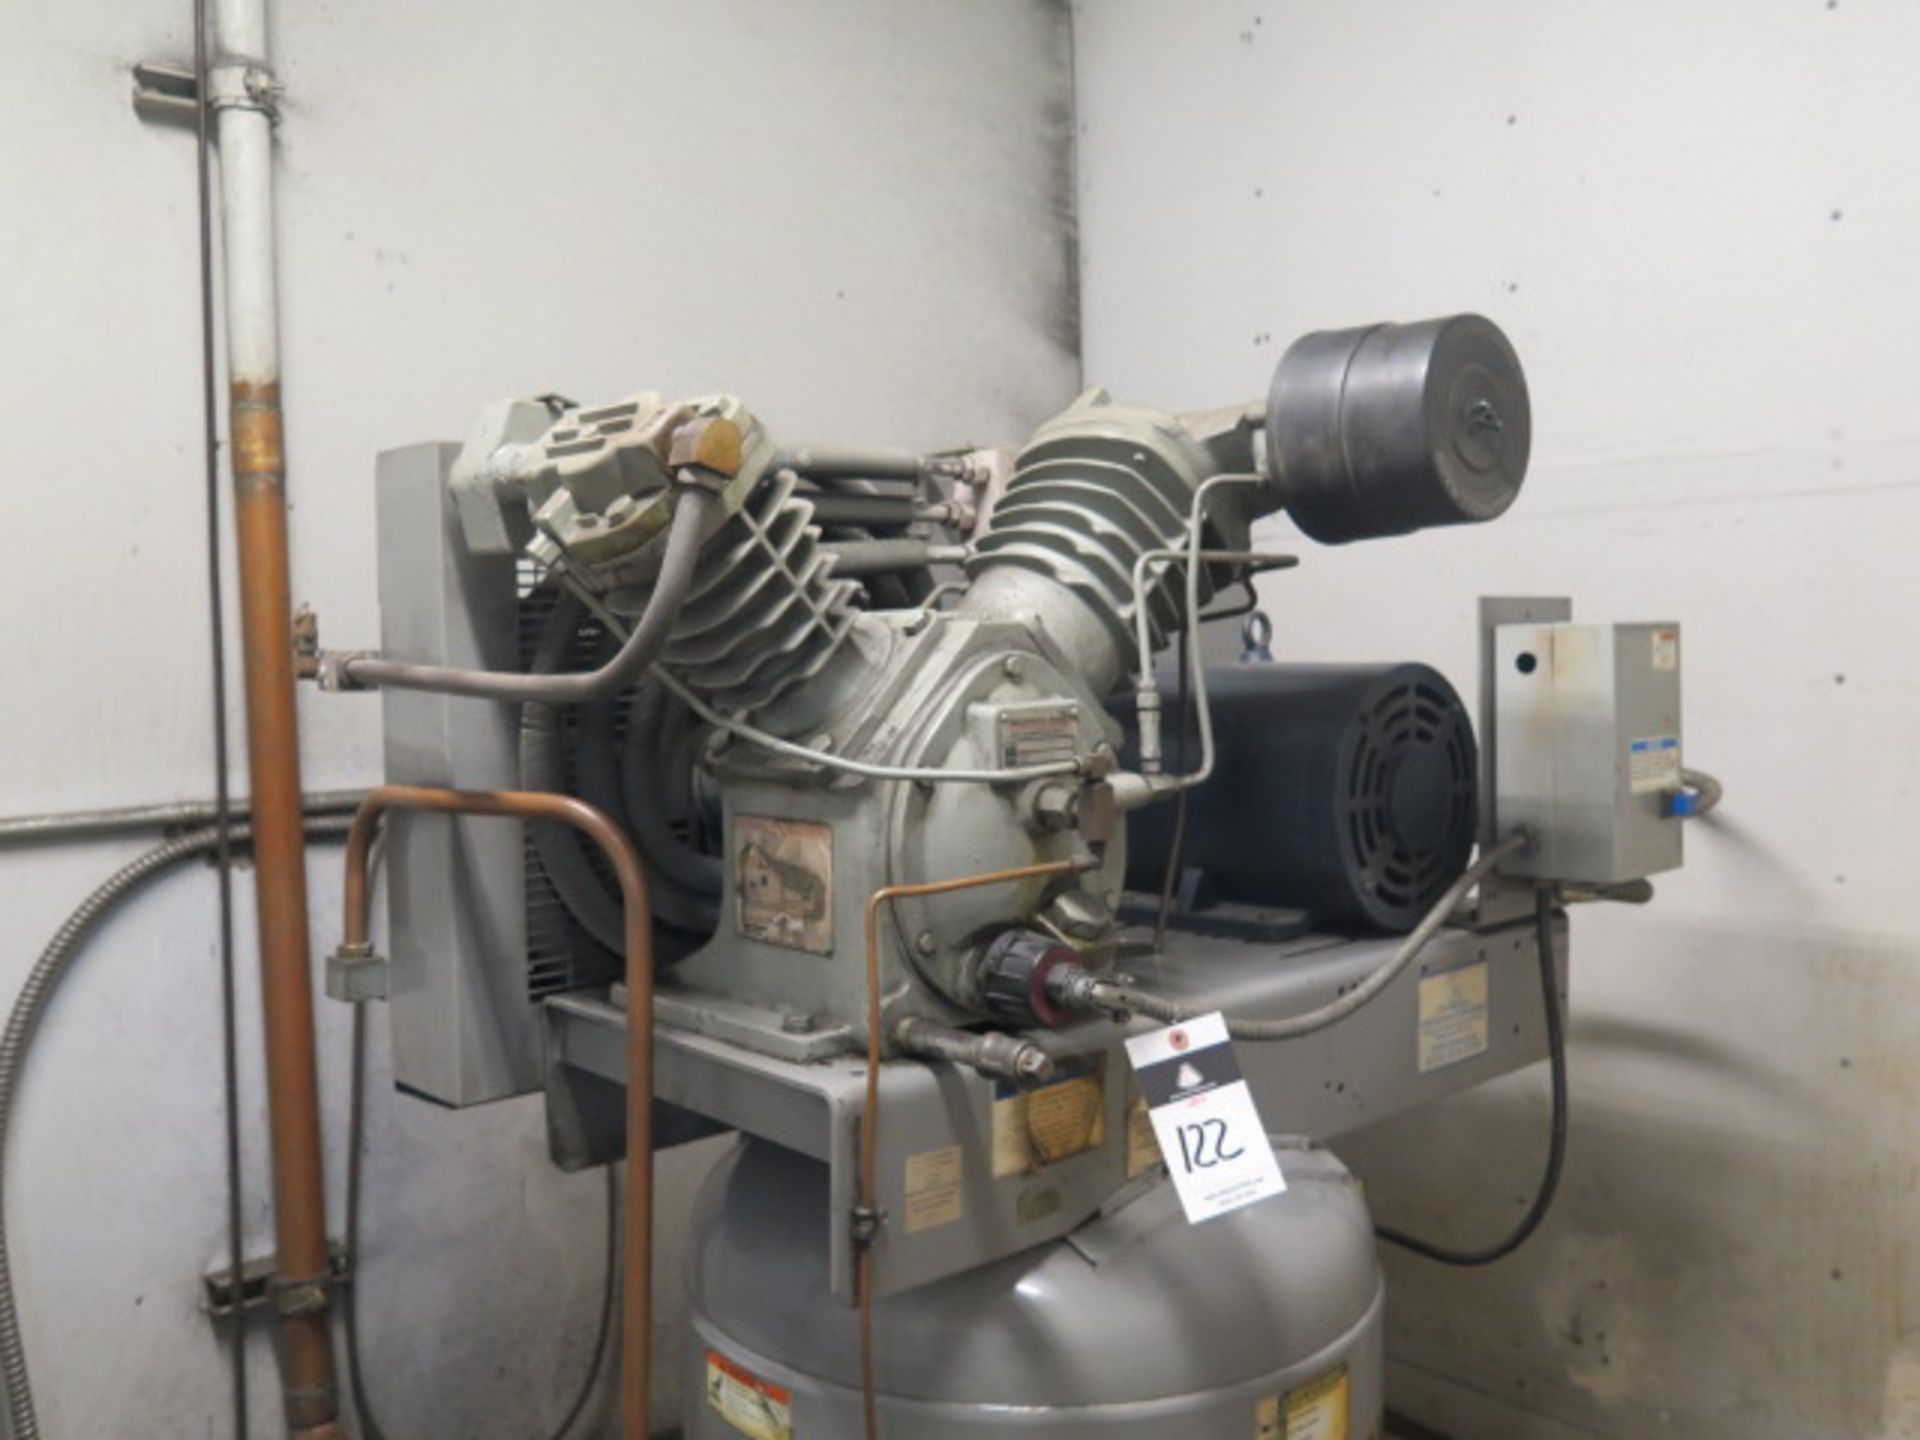 Ingersoll Rand T30 10Hp Vertical Air Compressor s/n 30T-889067 w/ 2-Stage Pump, 80 Gallon Tank - Image 2 of 5